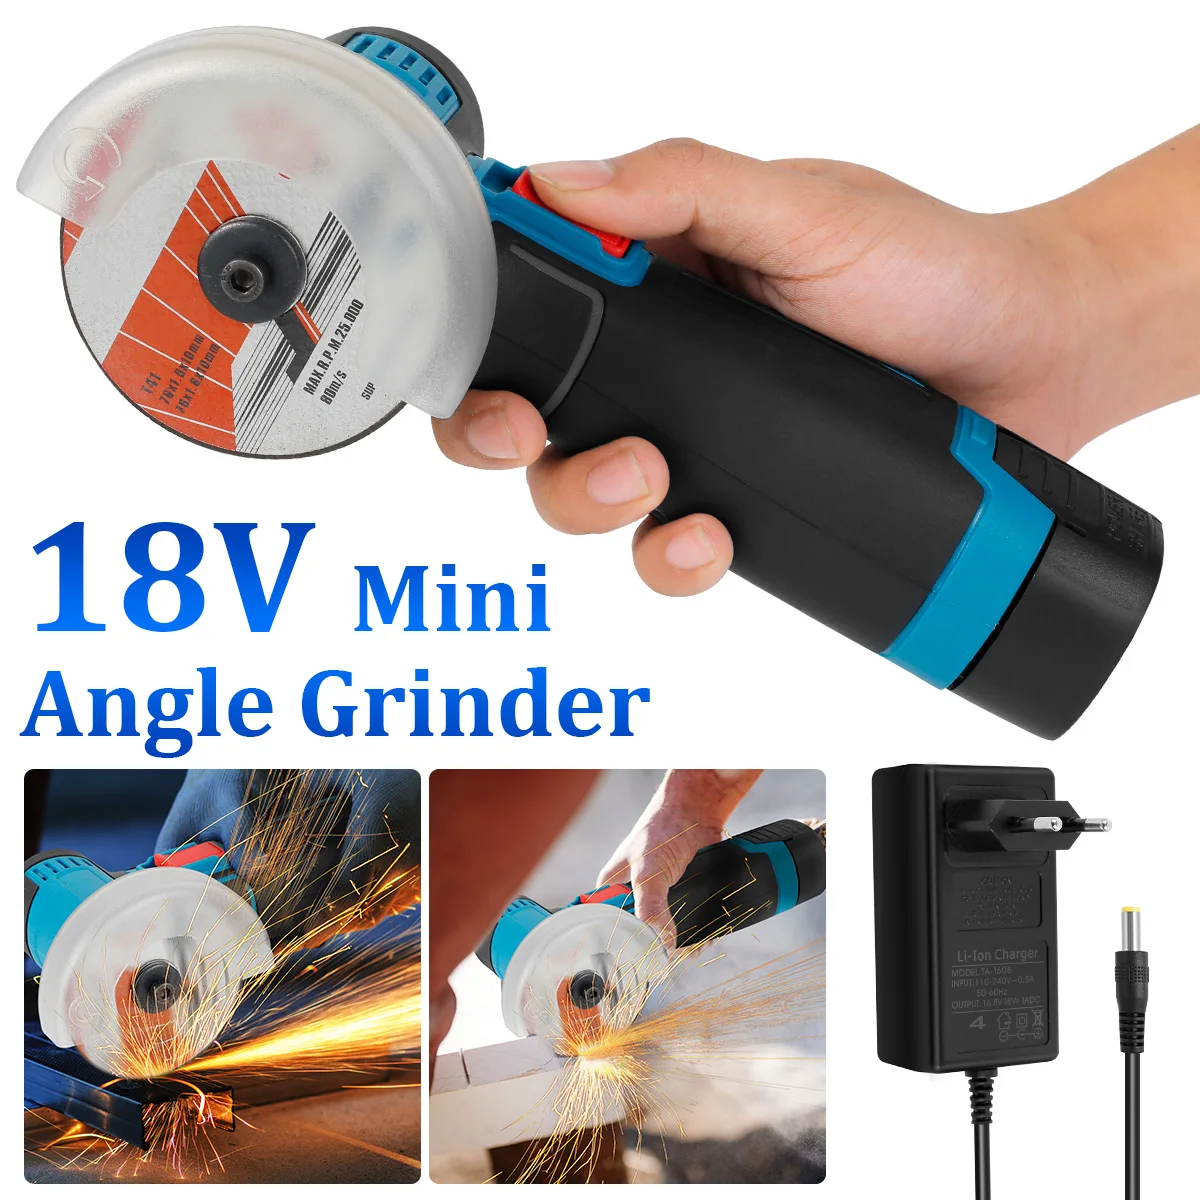 Mini Angle Grinder 18V 9000rpm Professional Small Angle Grinder Tool with 1/2 Battery and 2 Discs Electric Grinder Machine Power